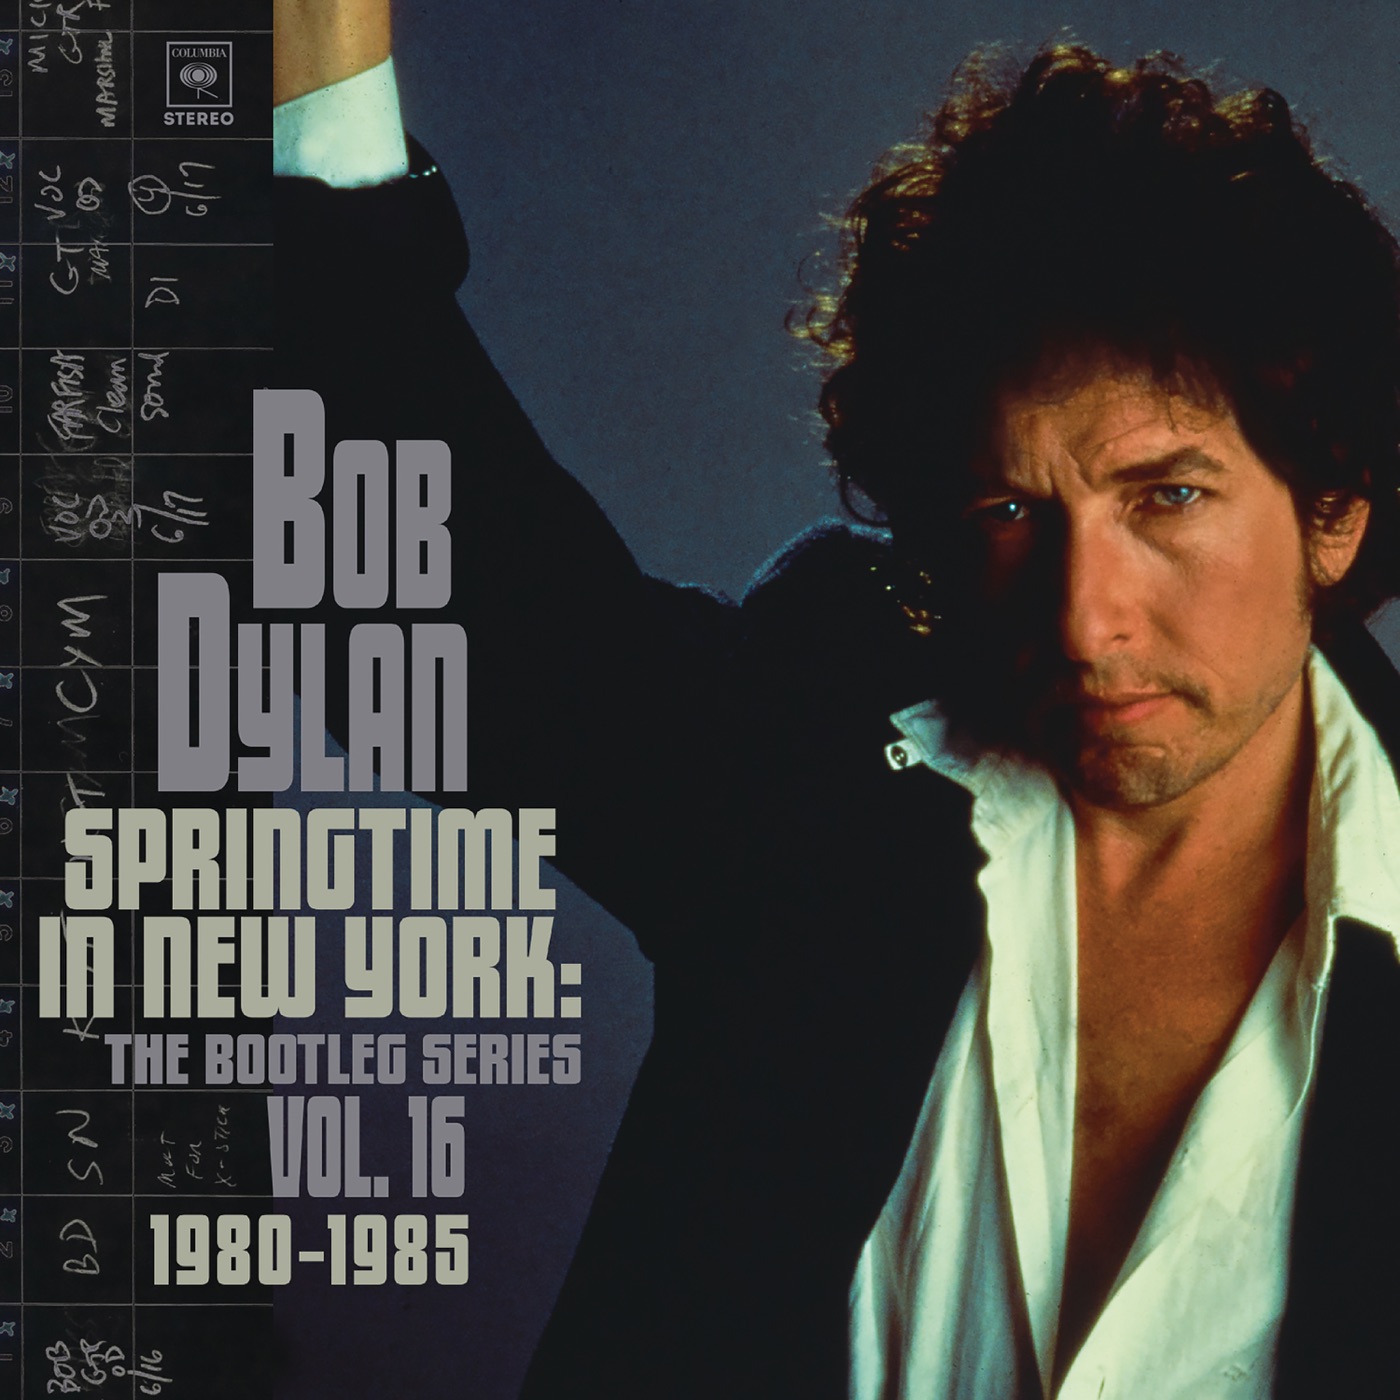 Don't Fall Apart on Me Tonight by Bob Dylan